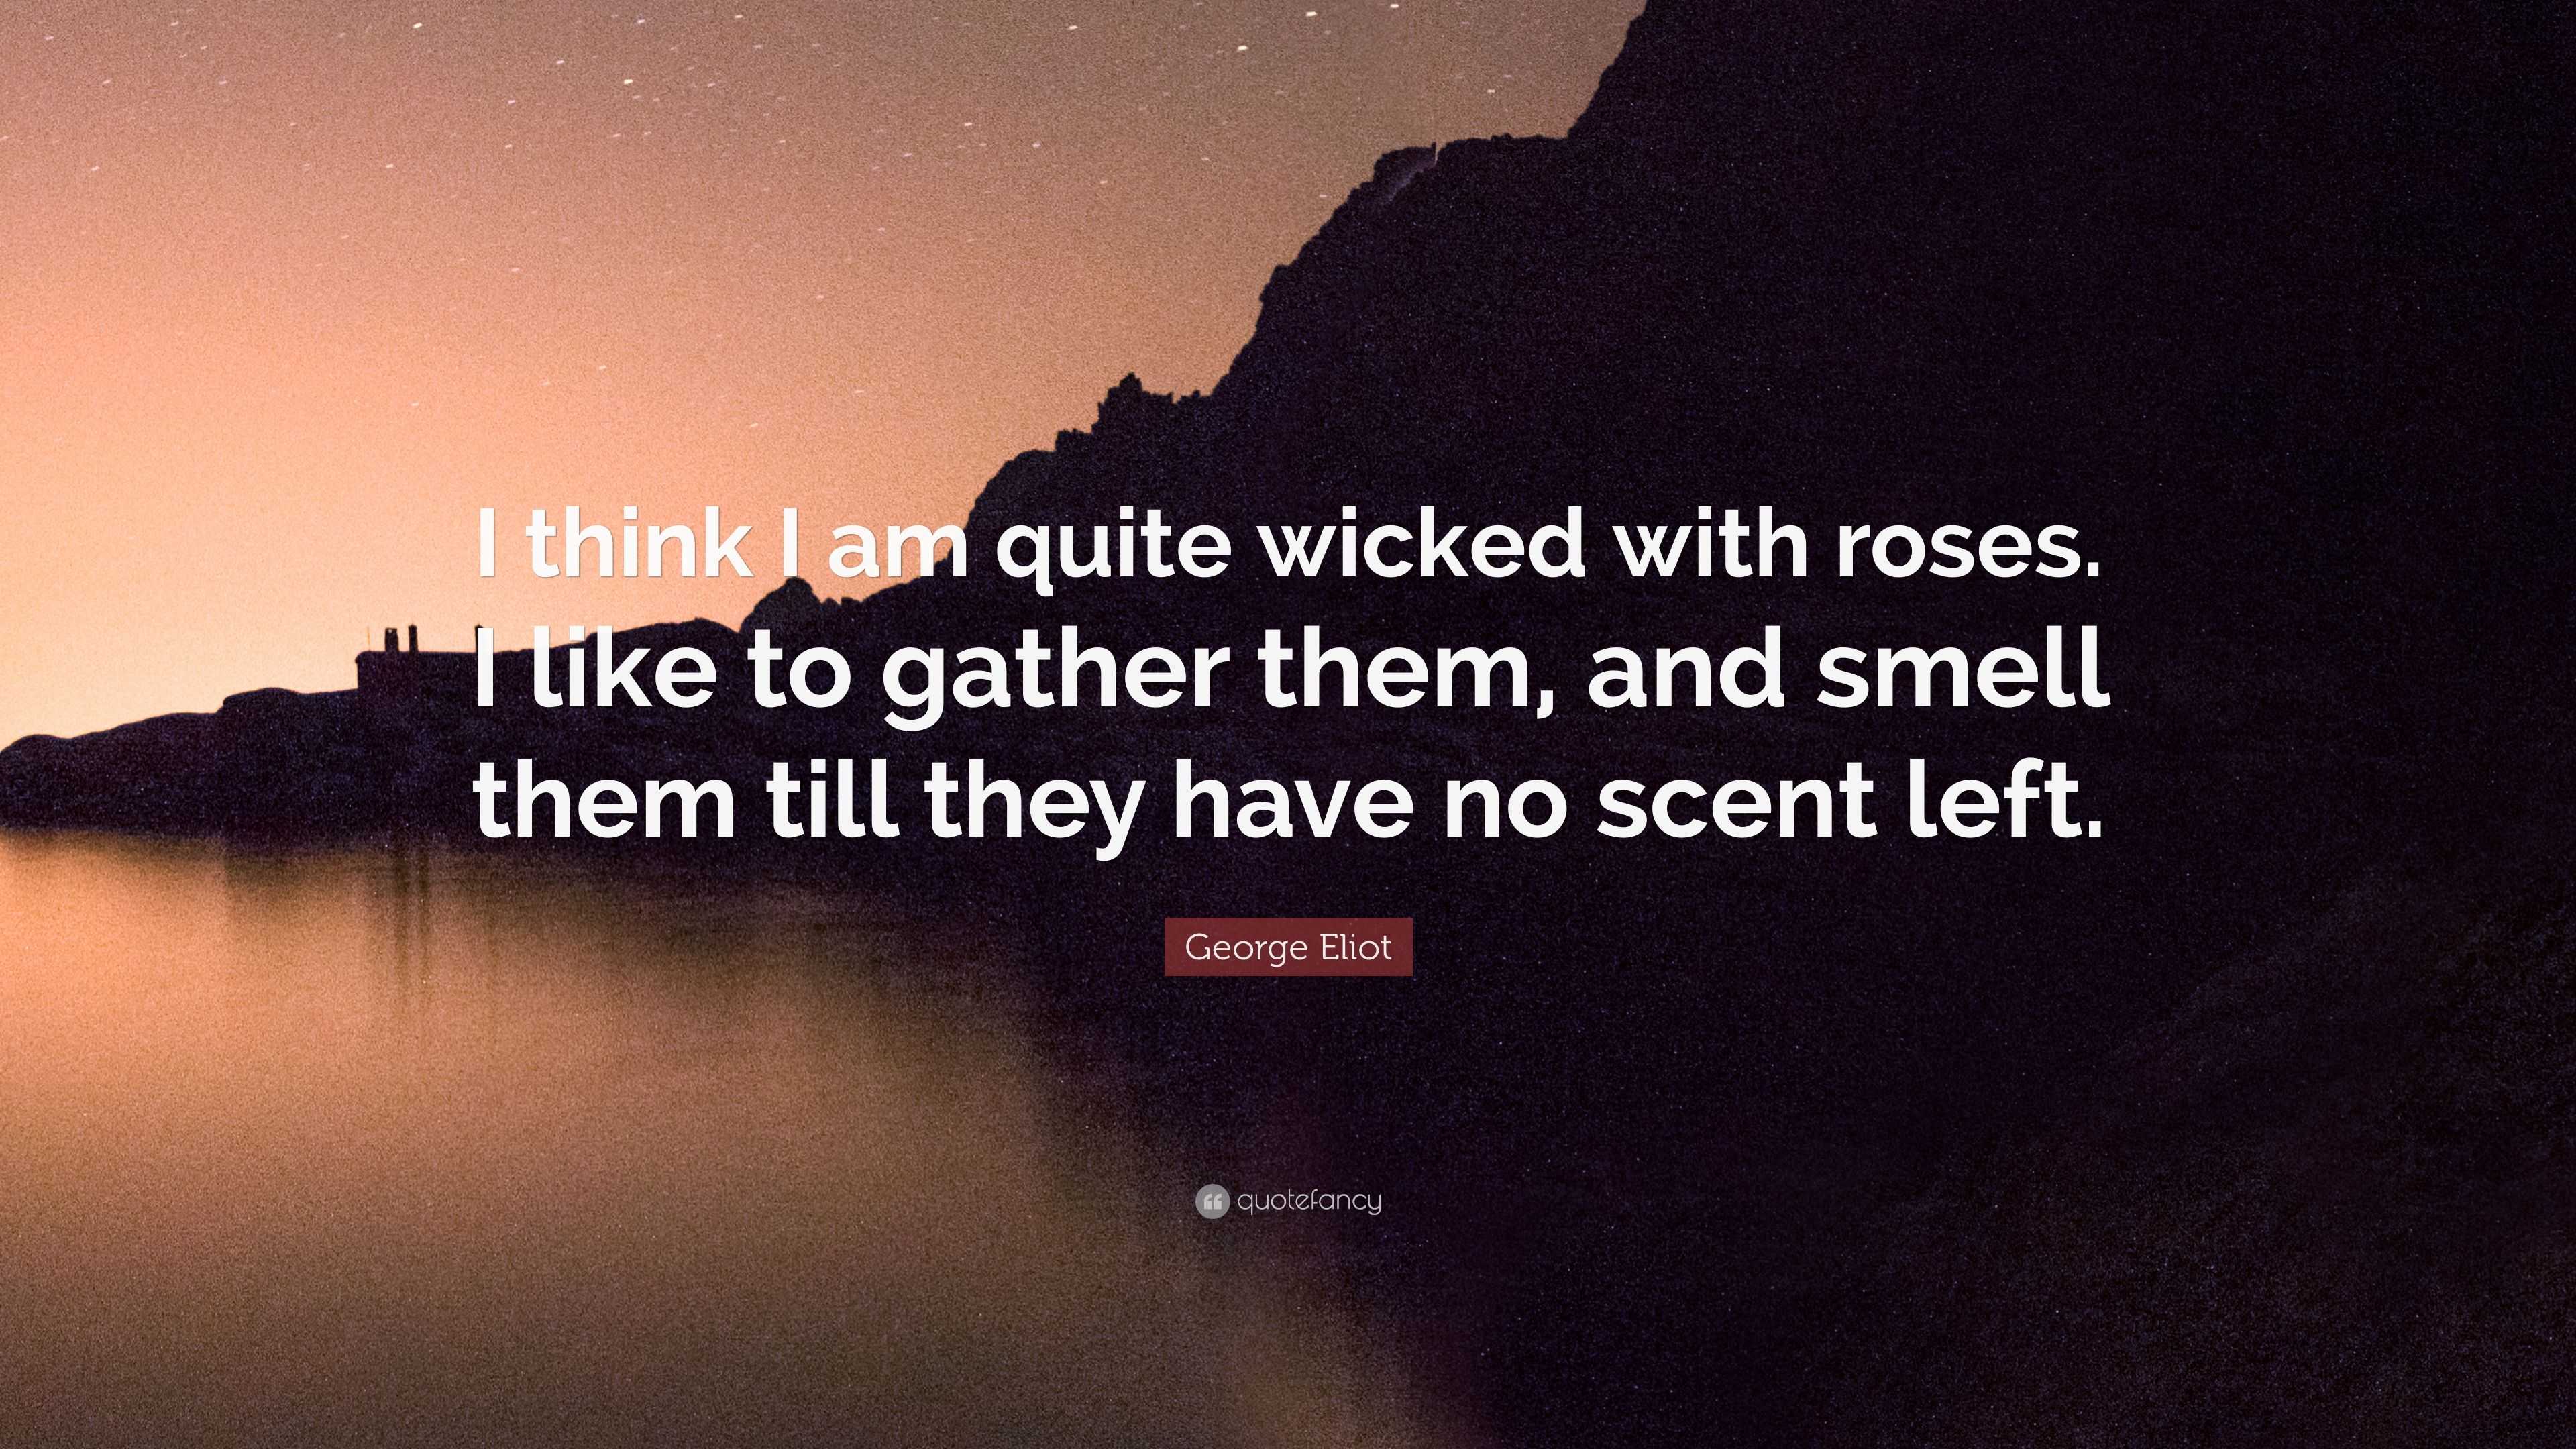 George Eliot Quote: “I think I am quite wicked with roses. I like to ...